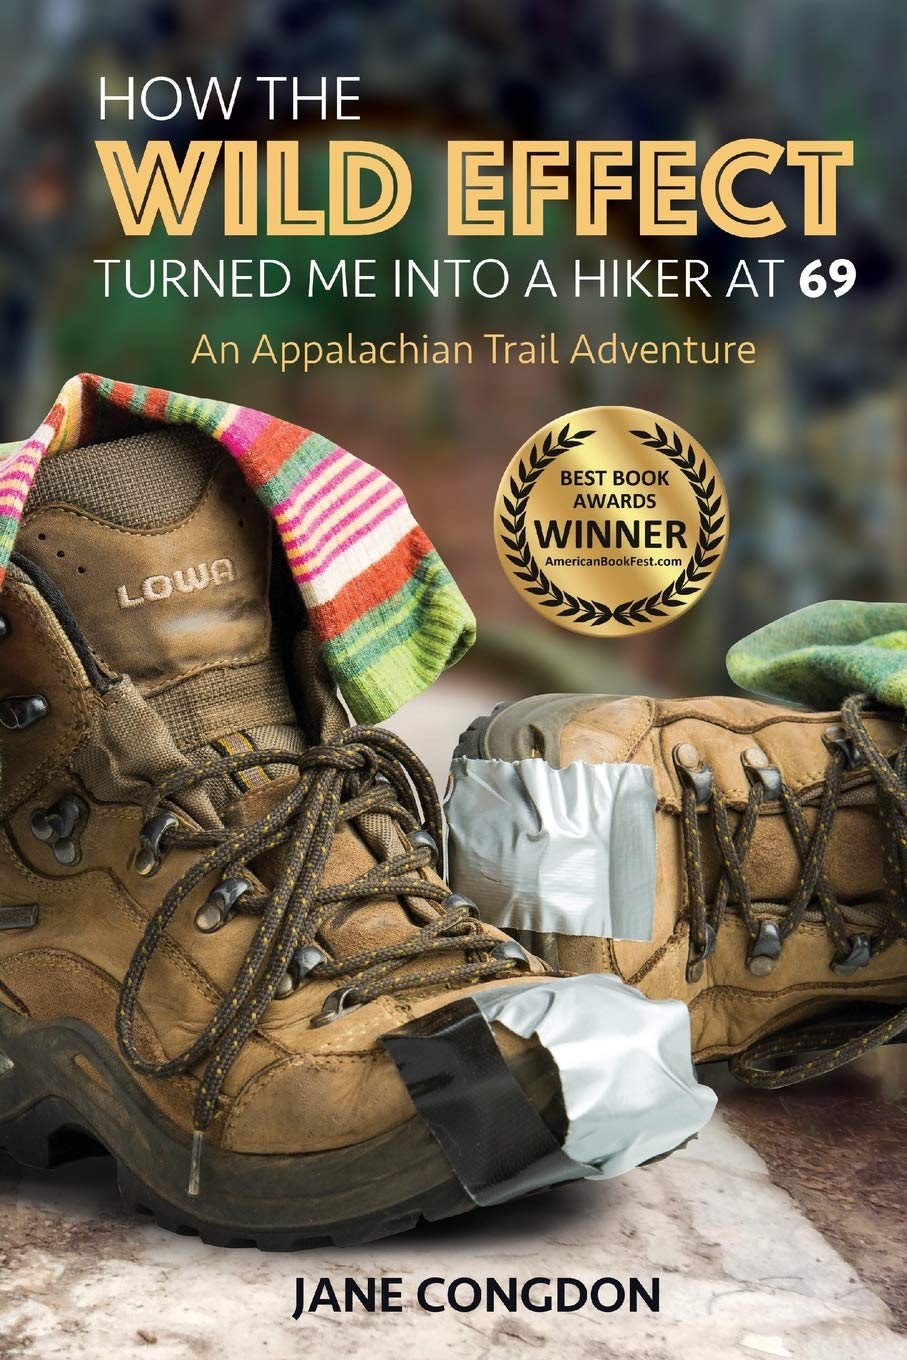 How the Wild Effect Turned Me into a Hiker at 69: An Appalachian Trail Adventure